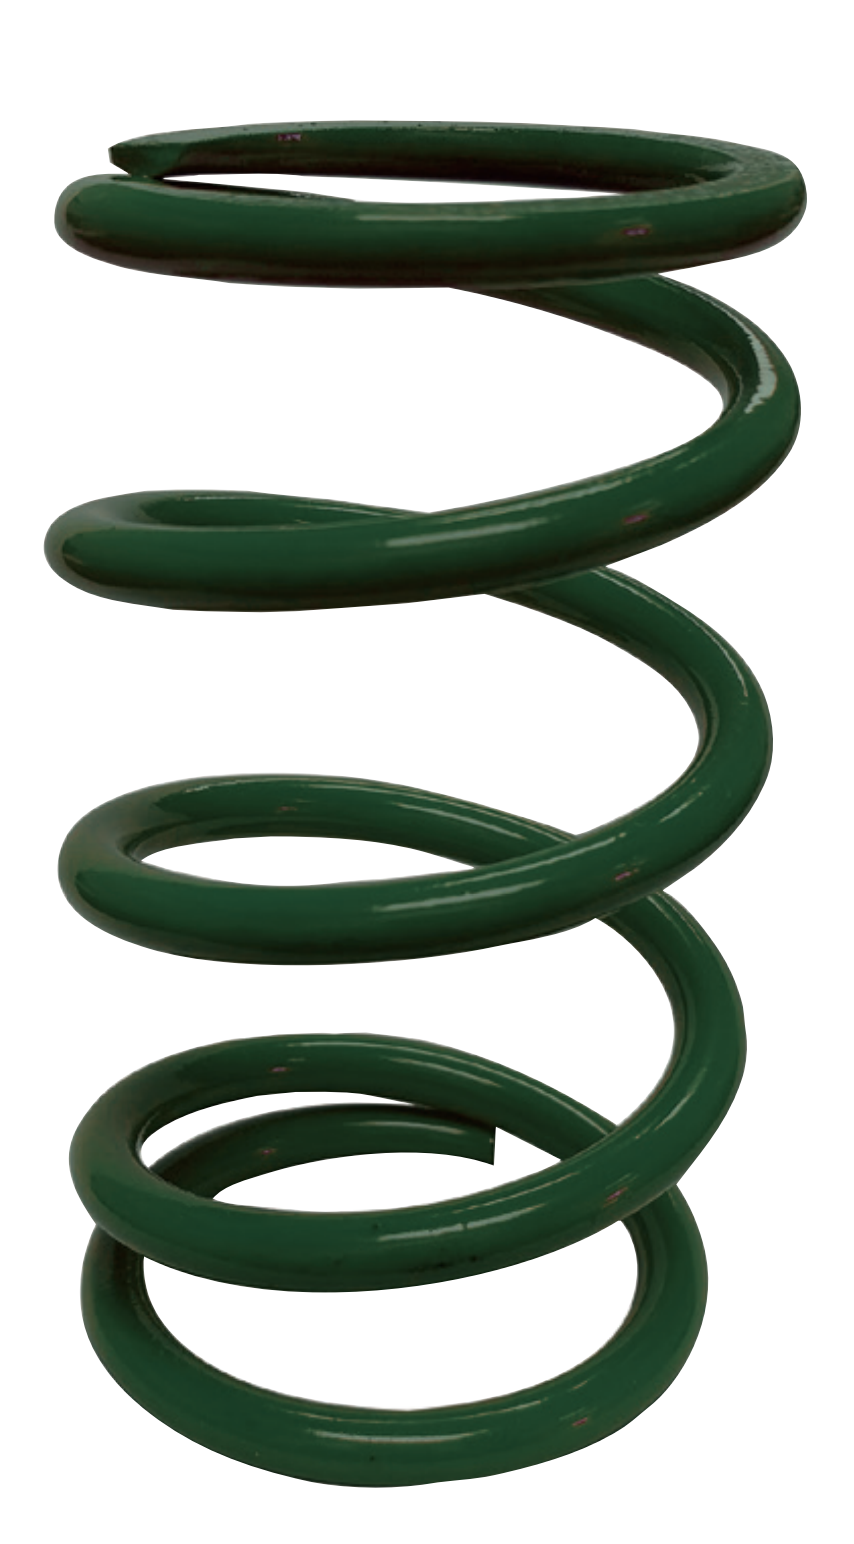 Venom Drive Clutch Springs for Arctic Cat and Polaris Clutches